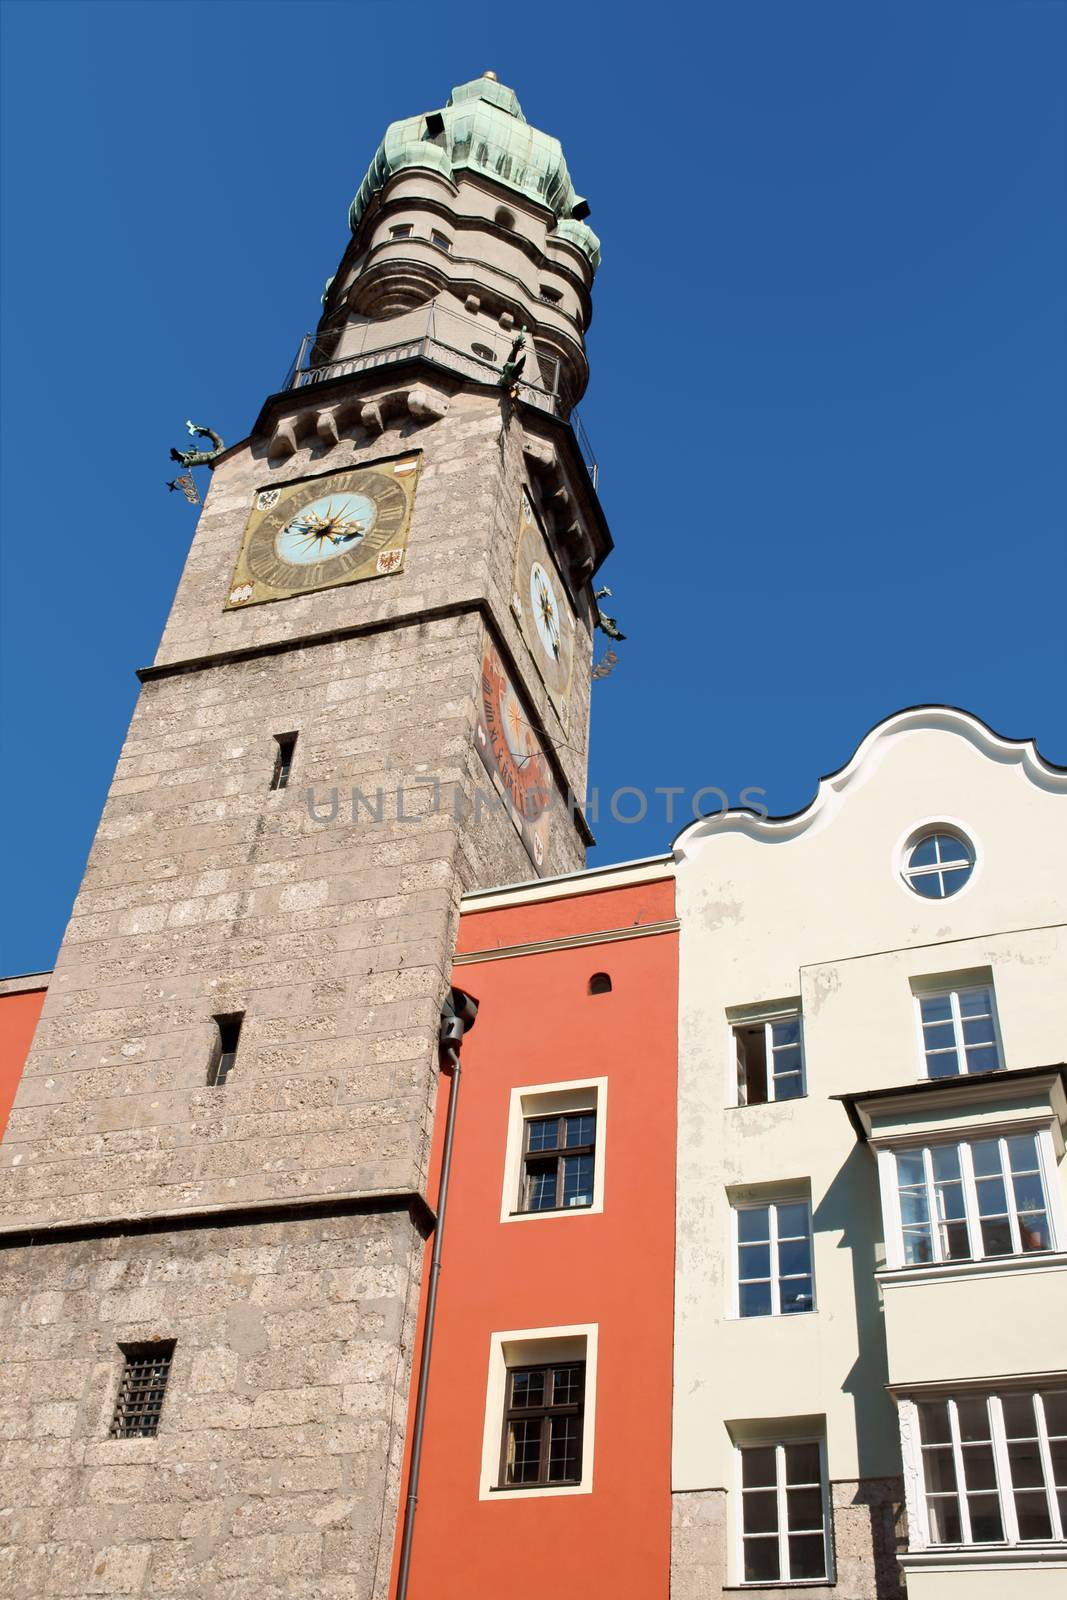 The Old Town watch tower of Innsbruck by citylights